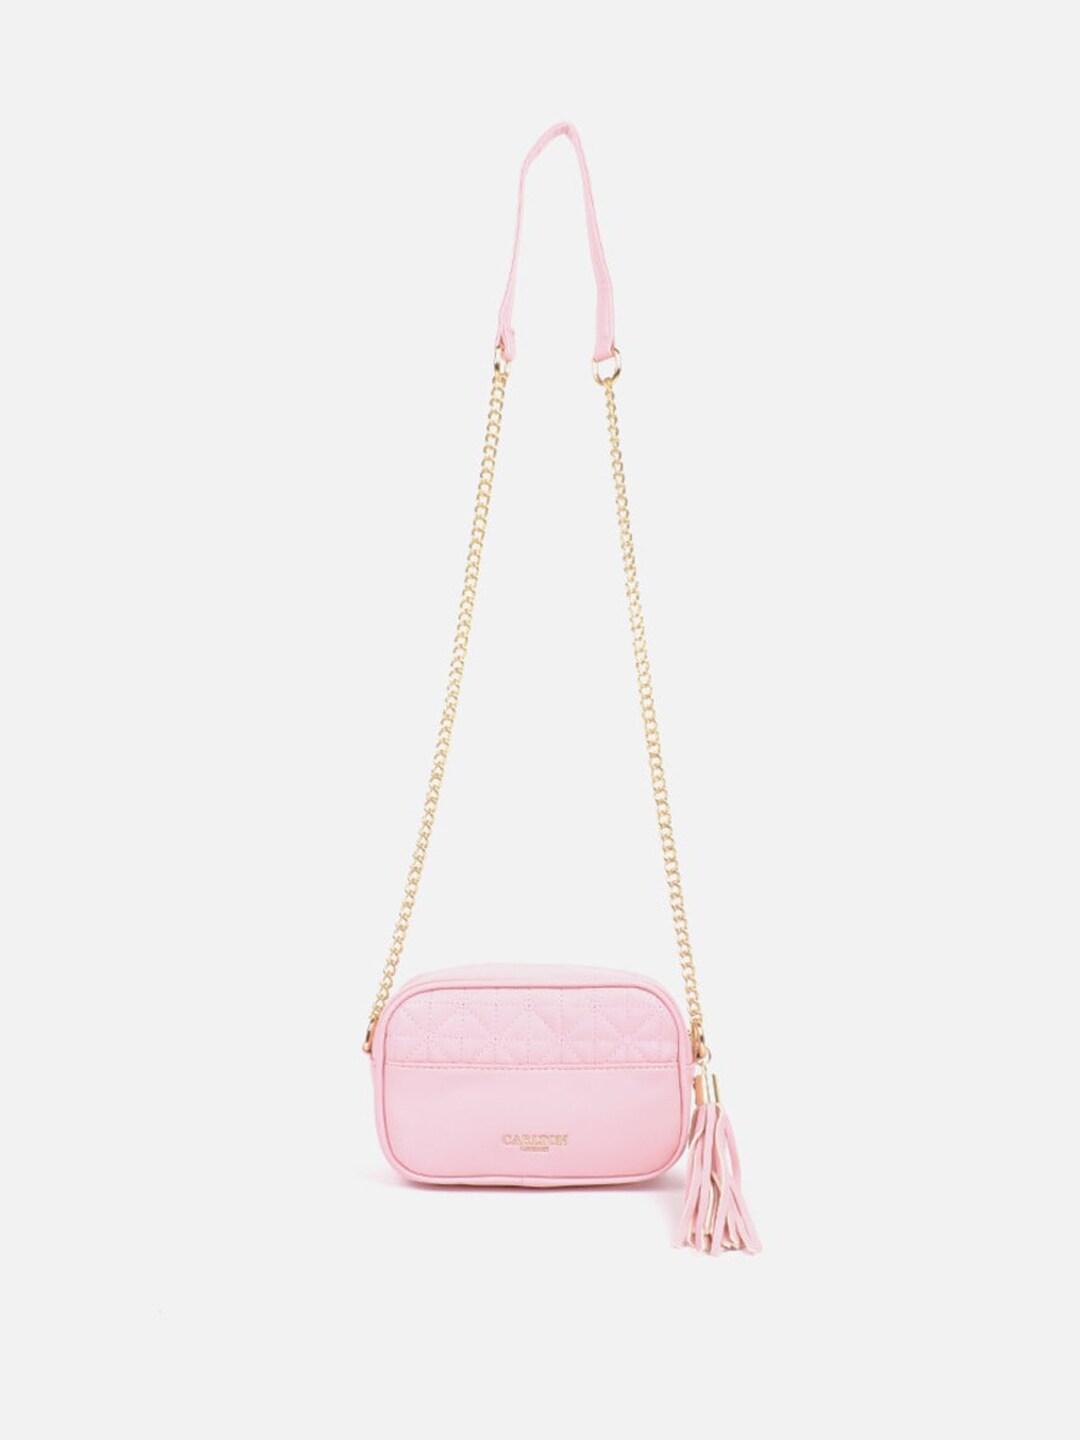 Carlton London Textured Structured Sling Bag with Tasselled